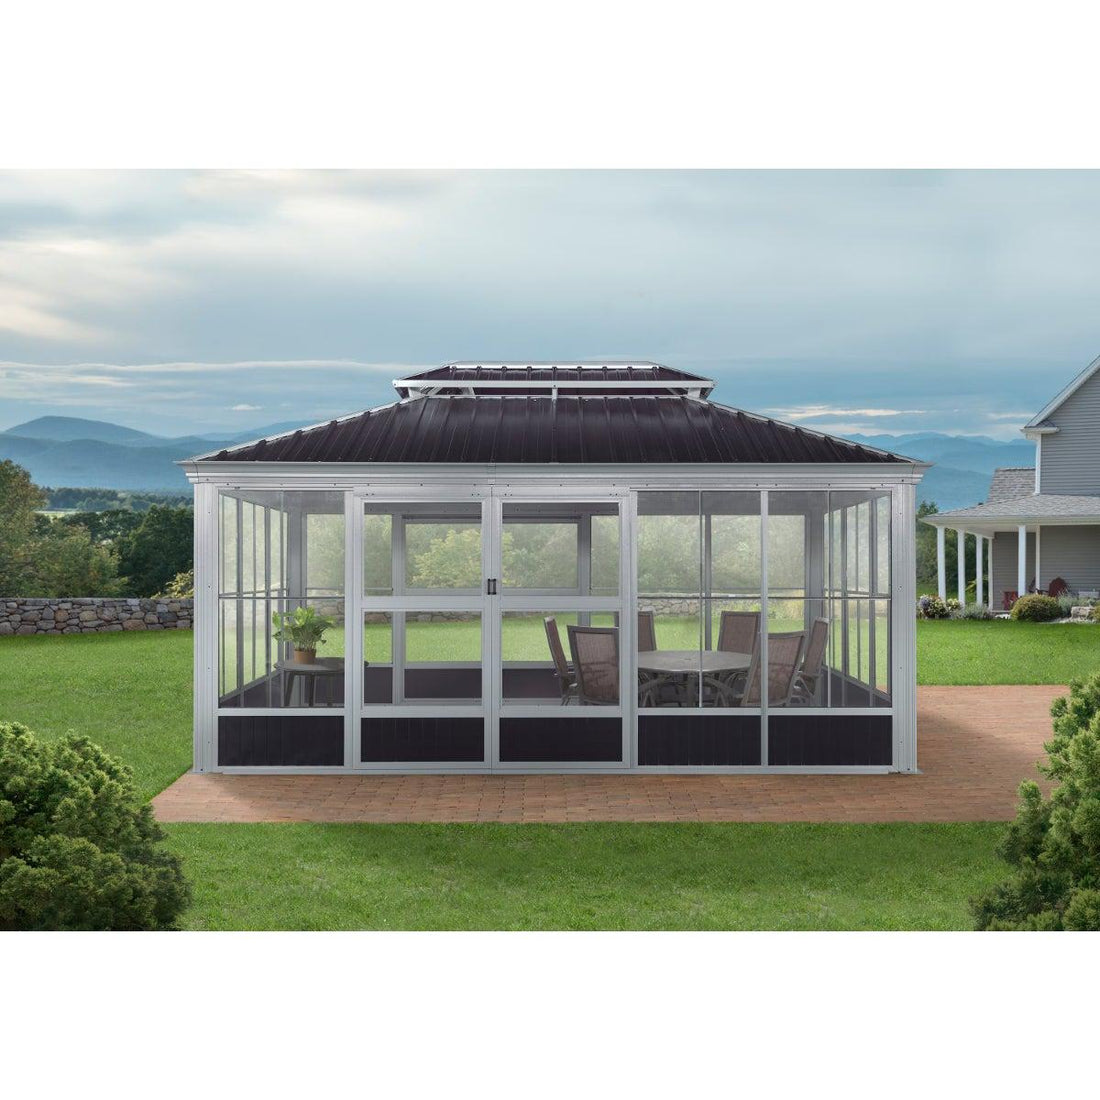 Brighten Your Life: Top 10 Irresistible Reasons to Install a Solarium in Your Home